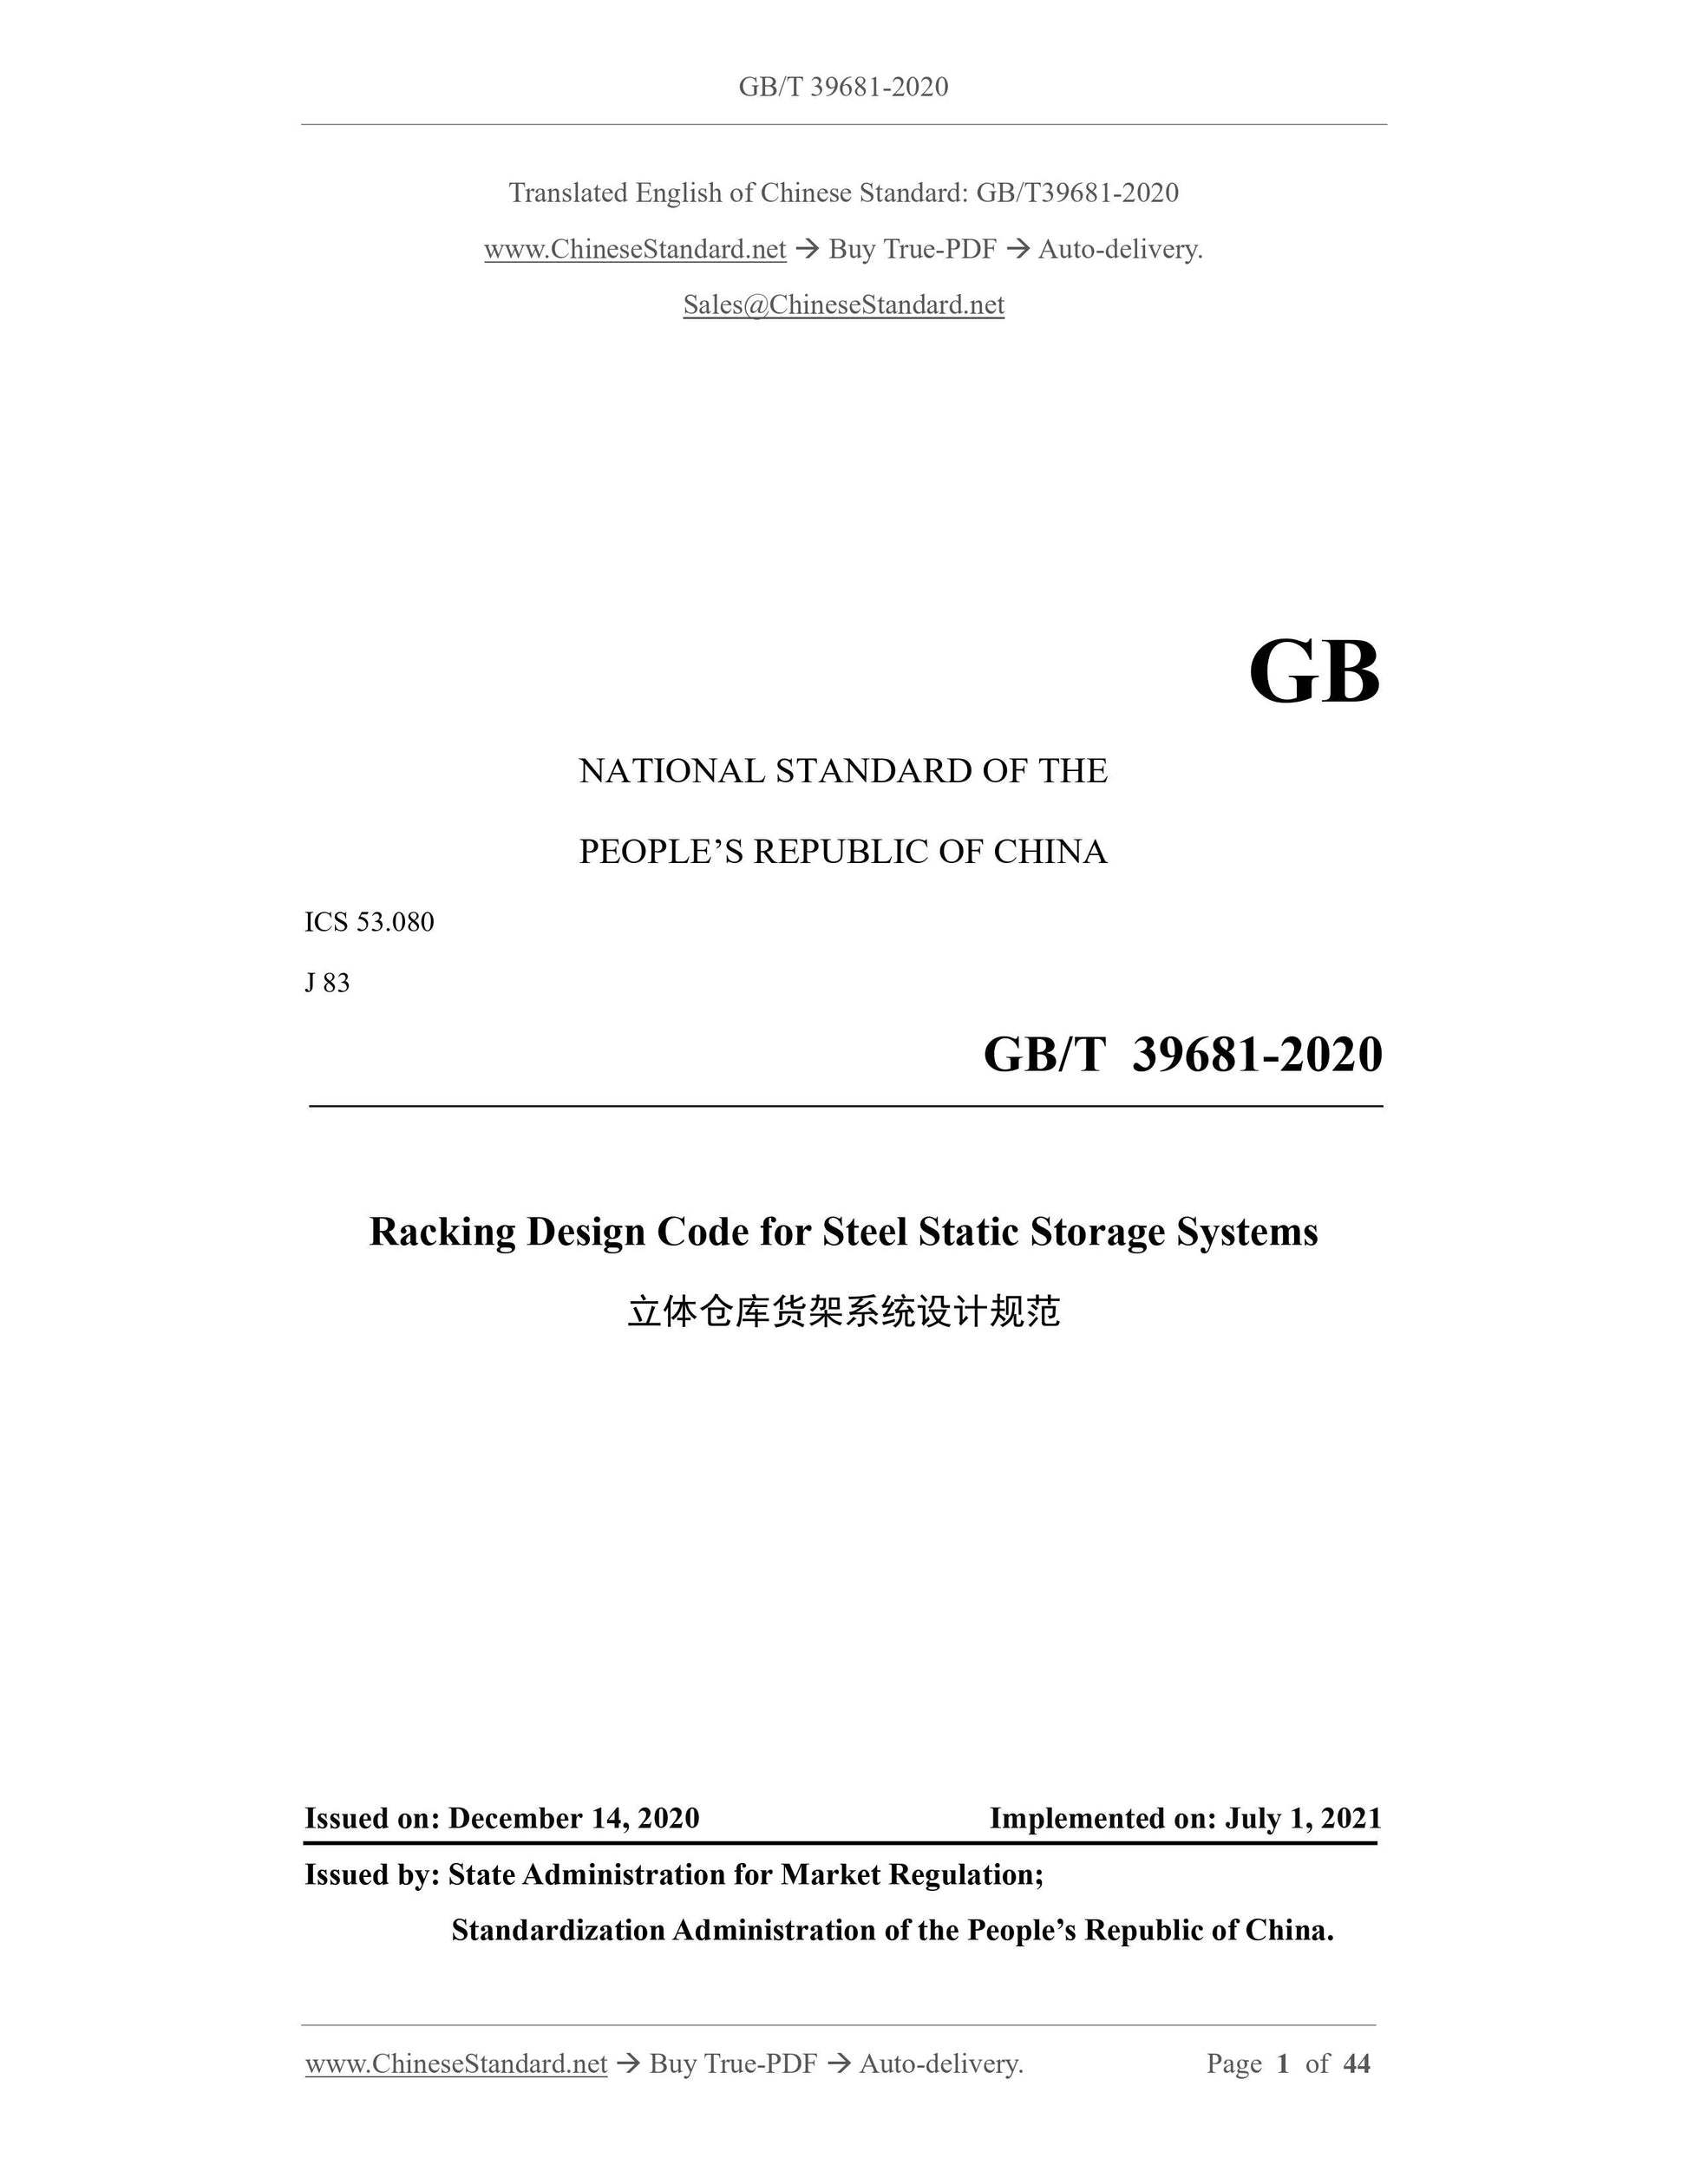 GB/T 39681-2020 Page 1